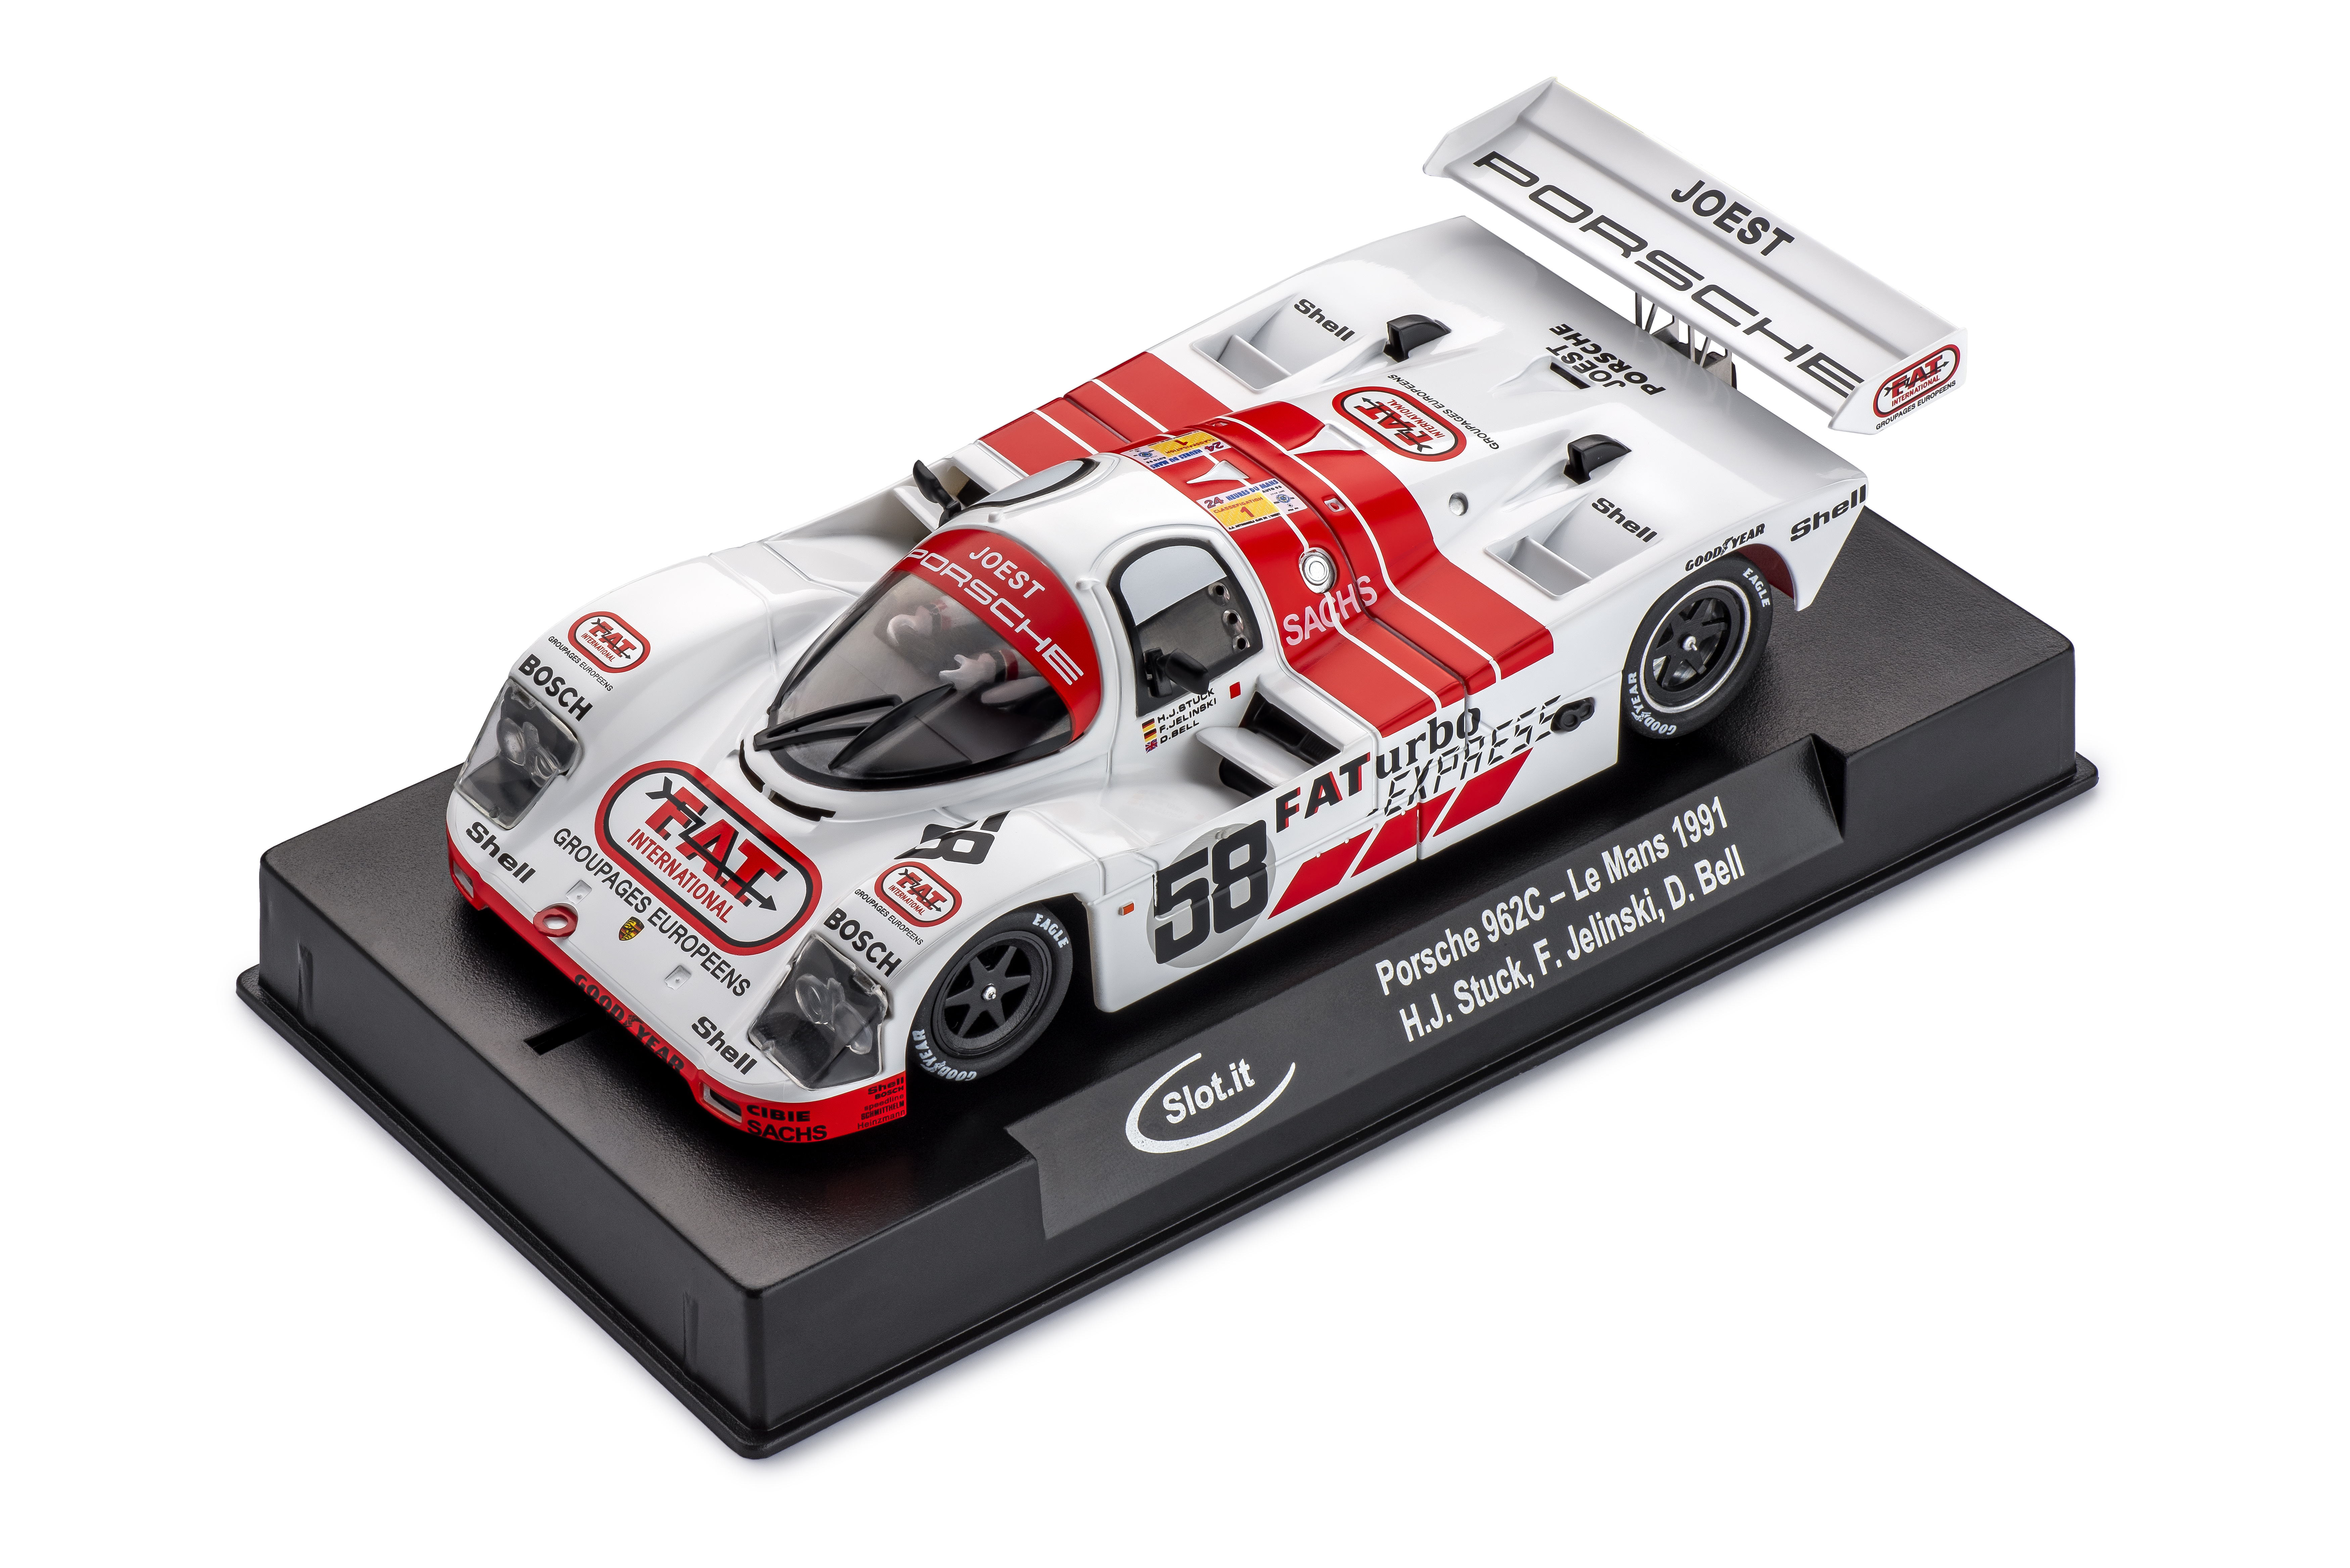 Slot.it CA52a Porsche 962C FAT TURBO 1/32 Slot Car. These are available to ship 5/5/23.